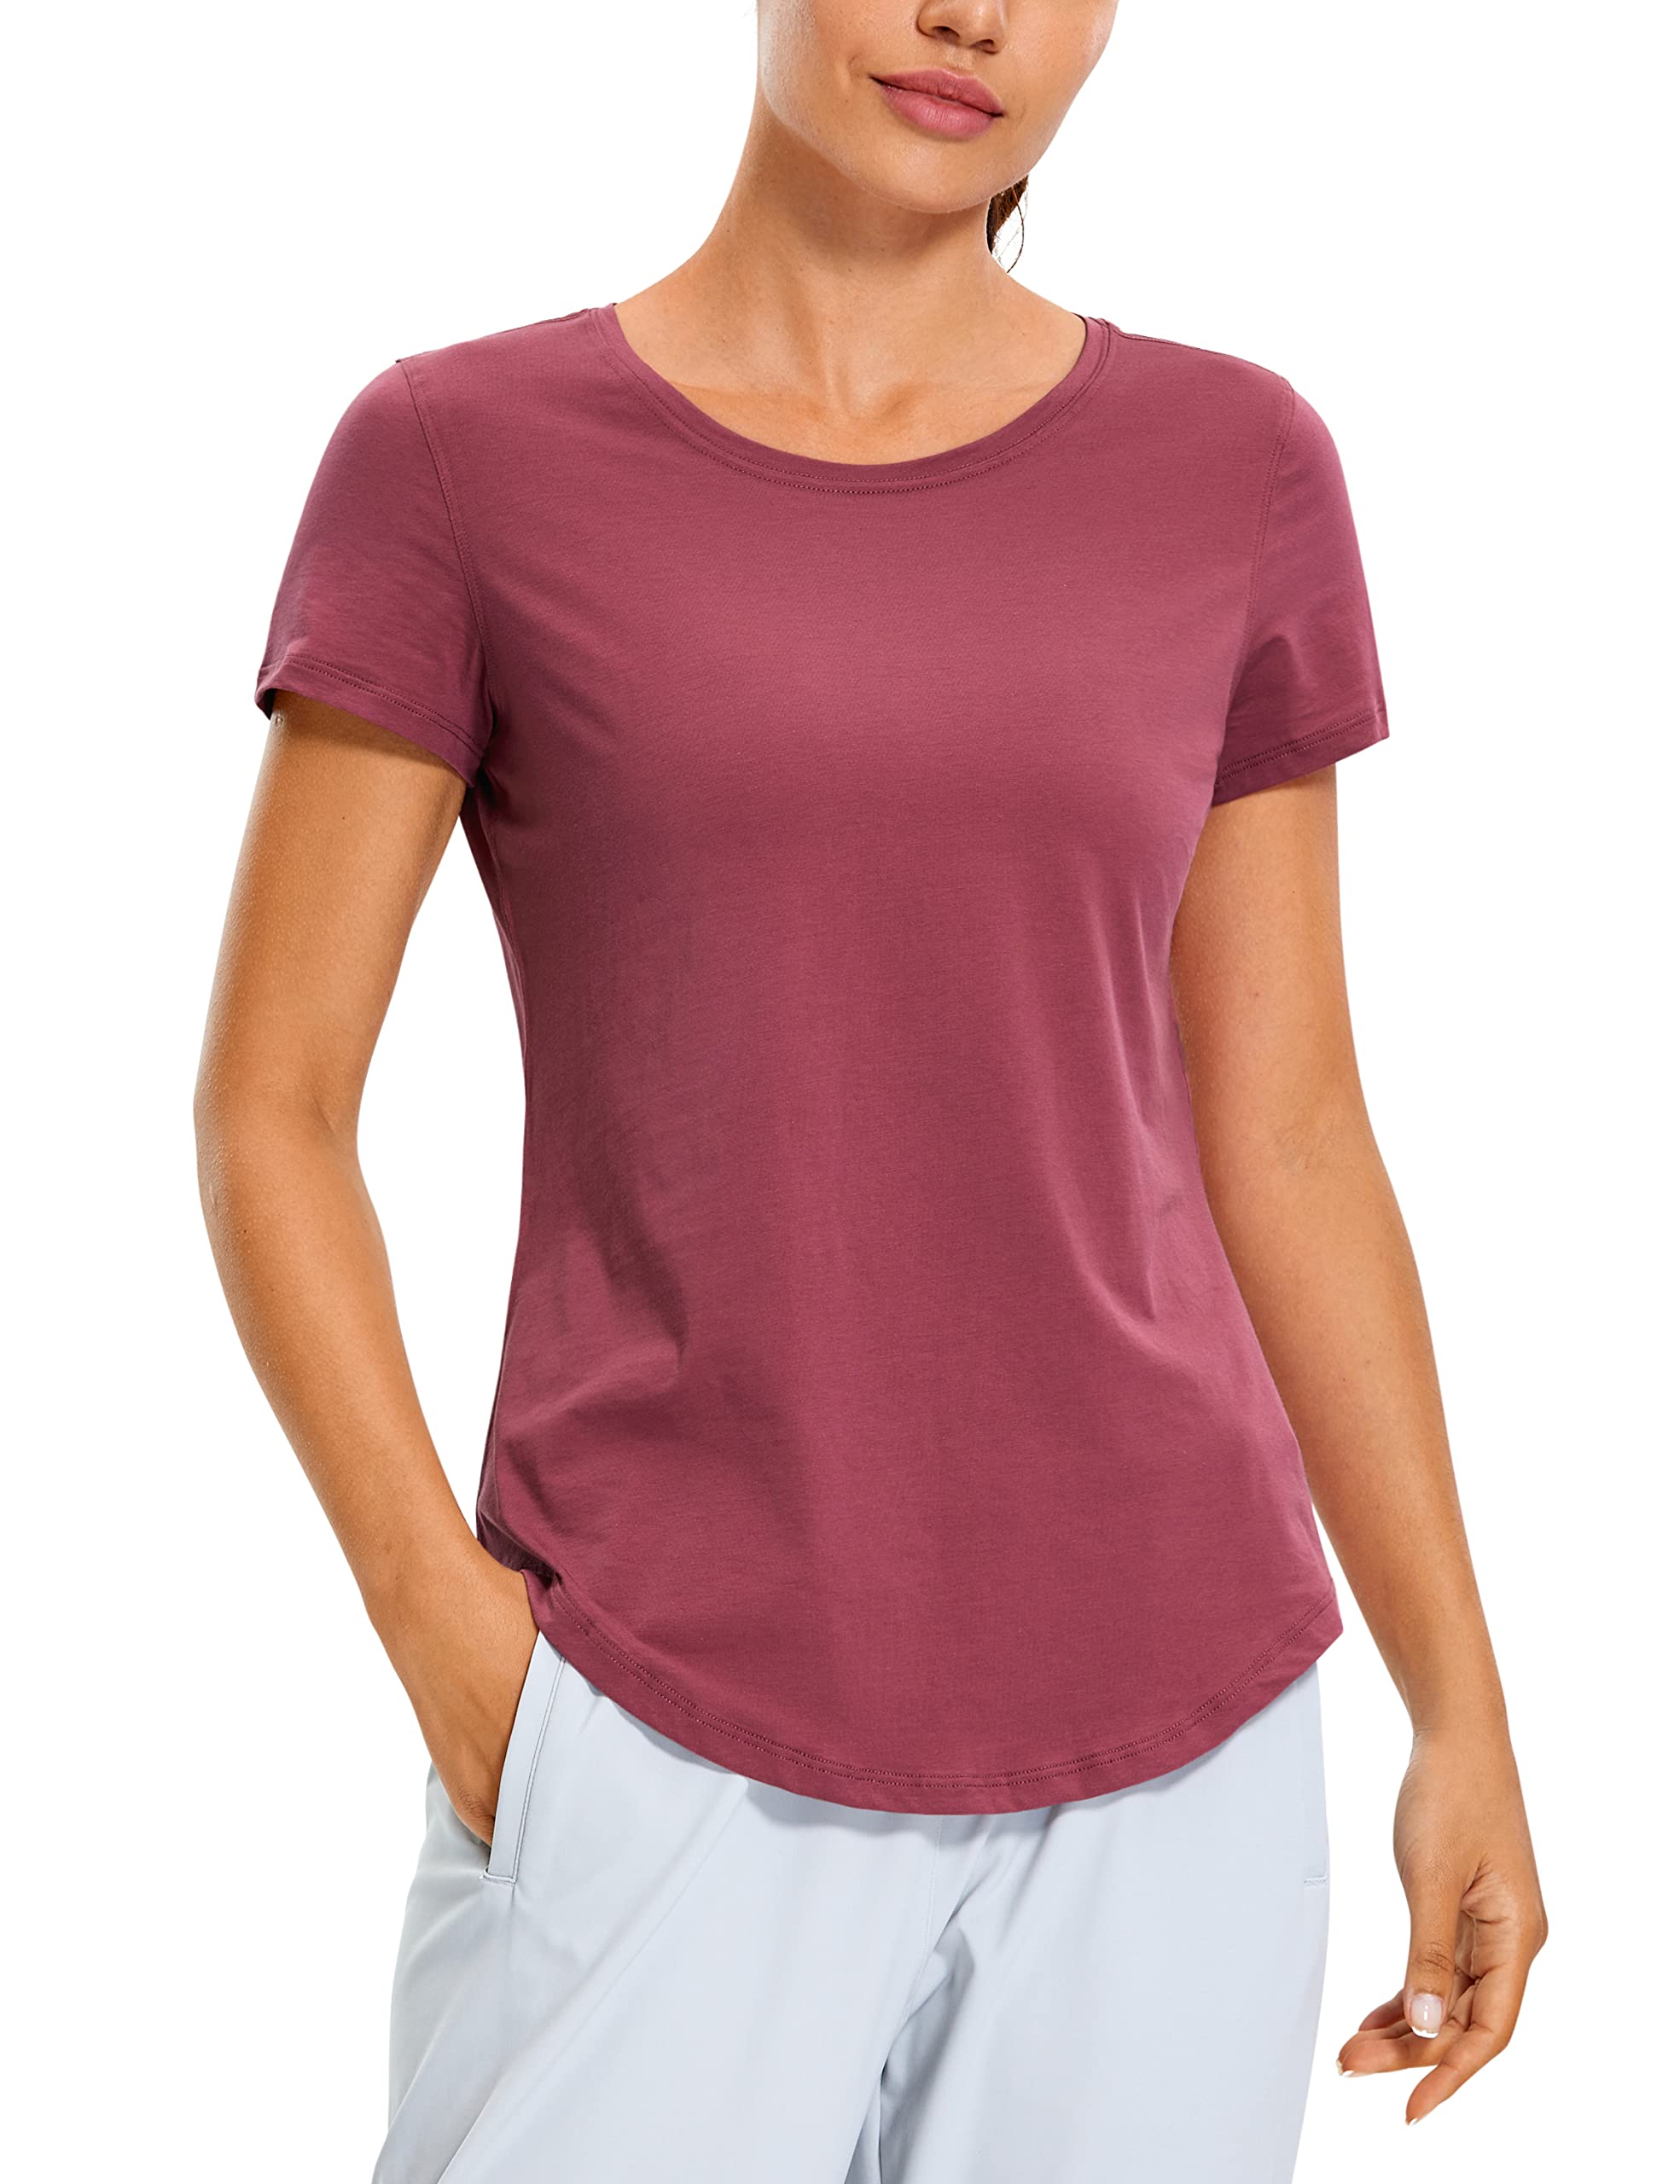 CRZ YOGA Long Sleeve Shirts for Women Loose Fit Pima Cotton Casual Tops 